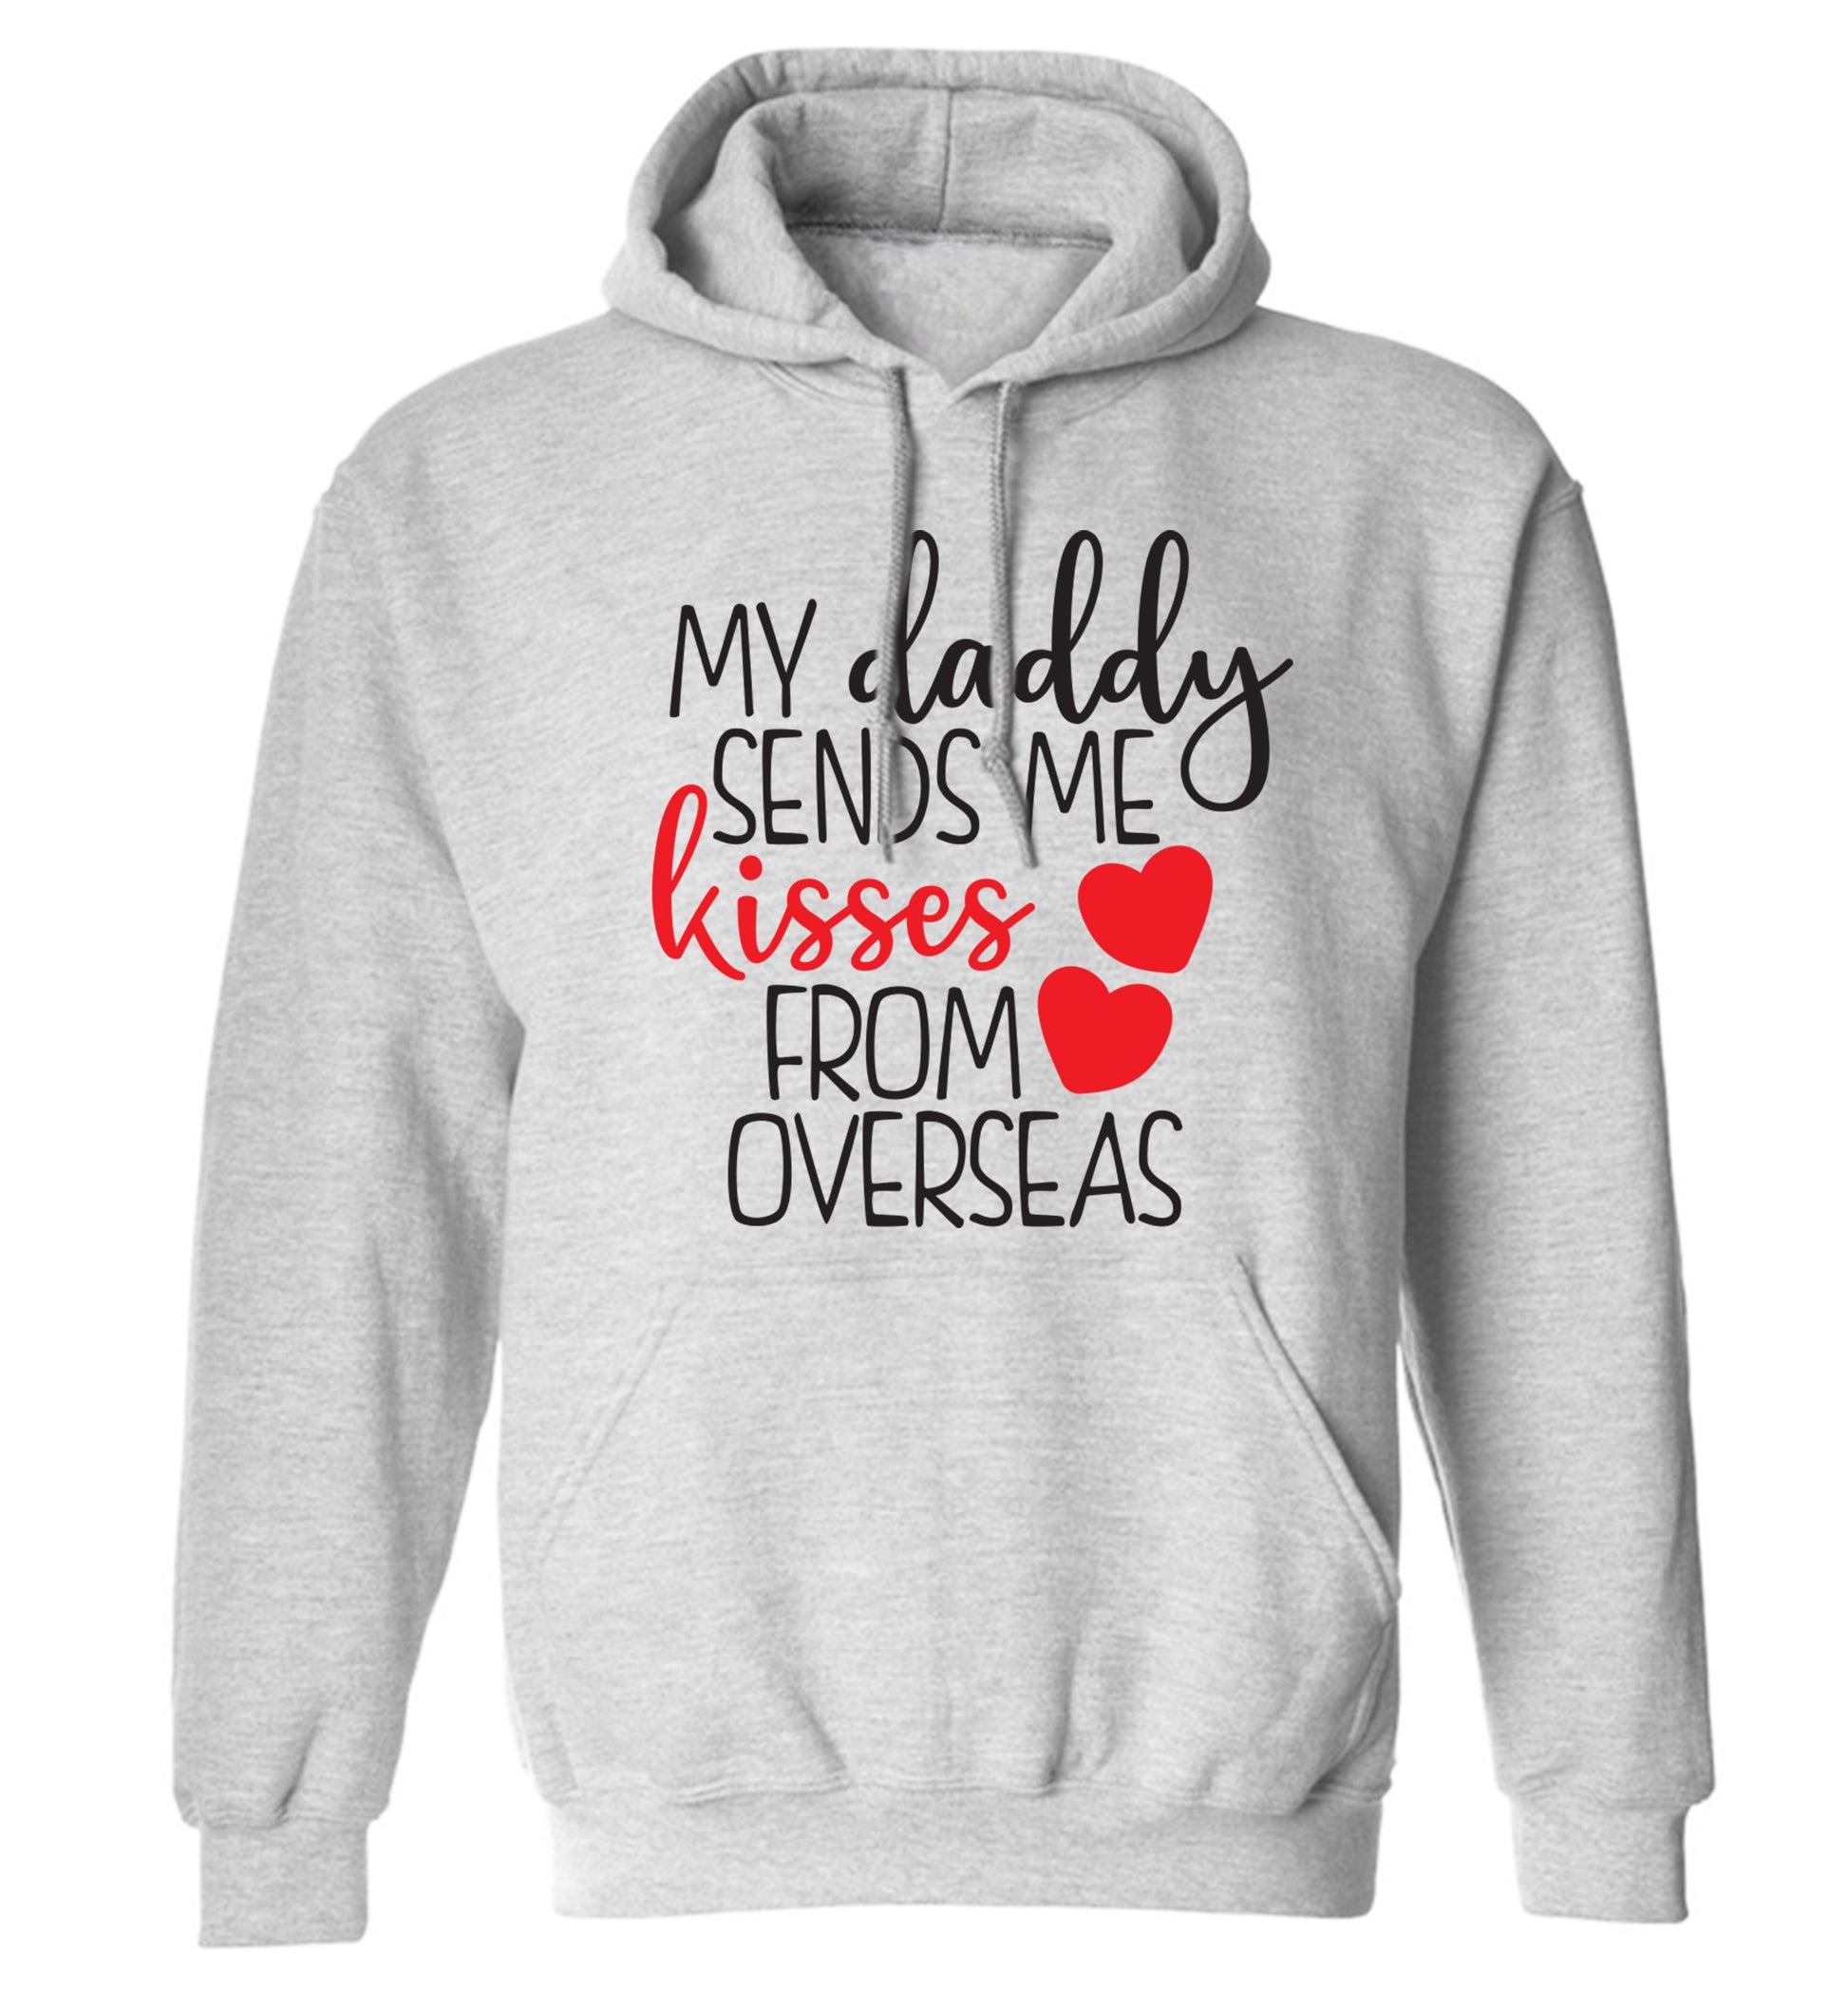 My daddy sends me kisses from overseas adults unisex grey hoodie 2XL